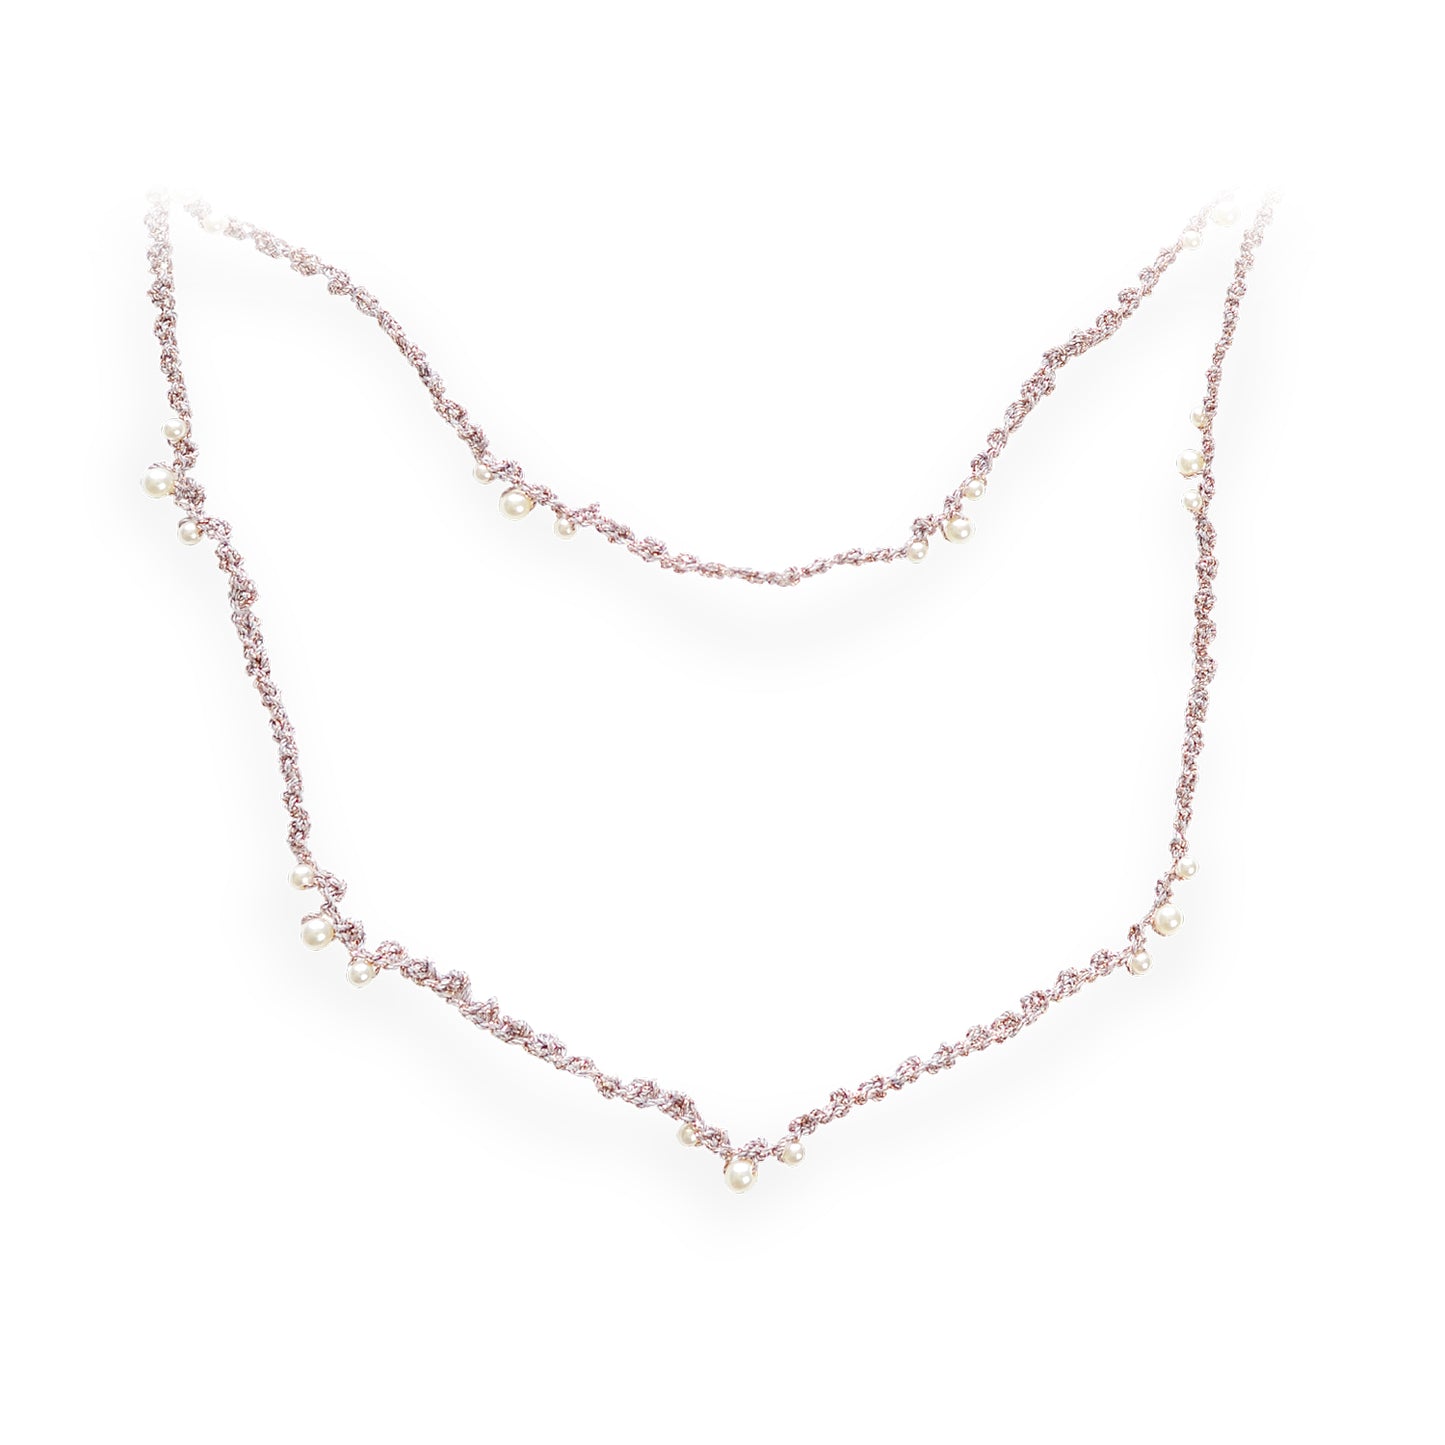 Dripping Pearls Series Double Strand Pearl Crochet Necklace Dusk